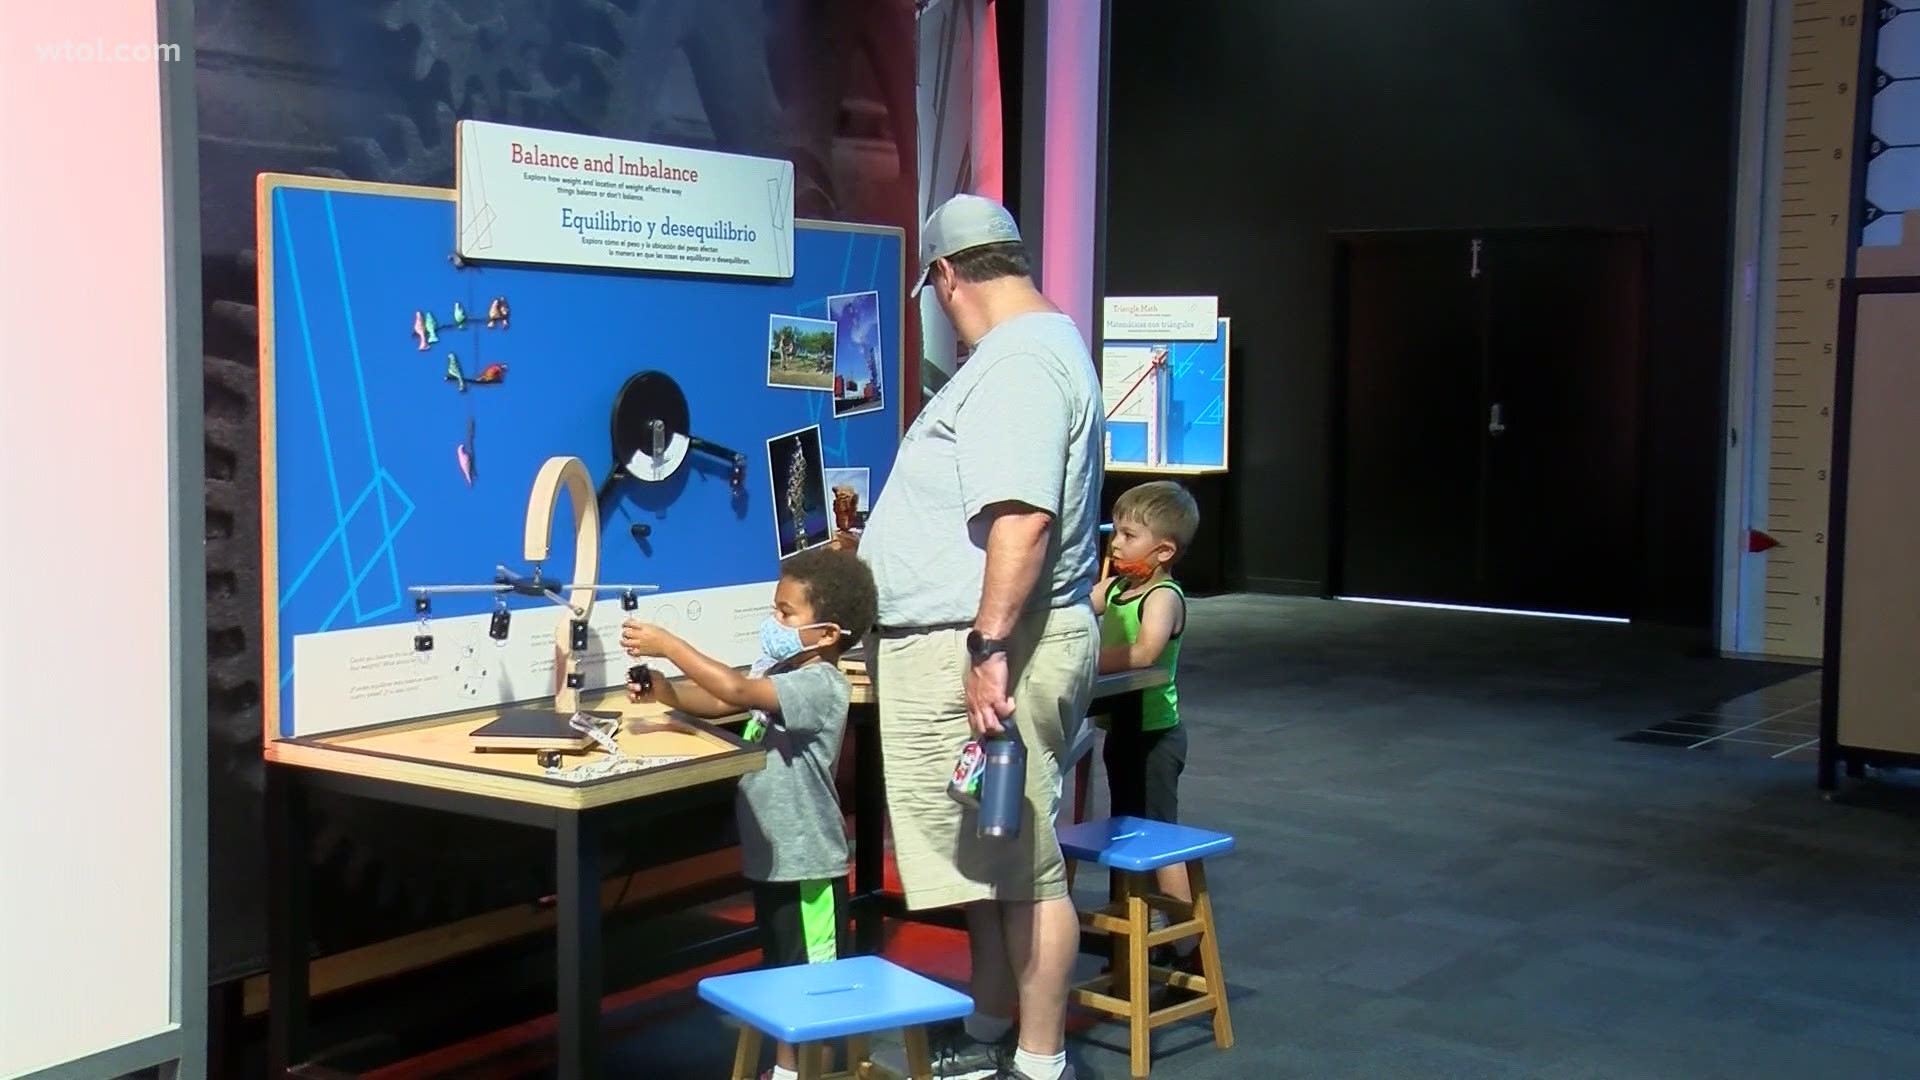 Hands-on activities for all ages are designed to make experimenting with concepts memorable and fun. The exhibit runs through the rest of the year.